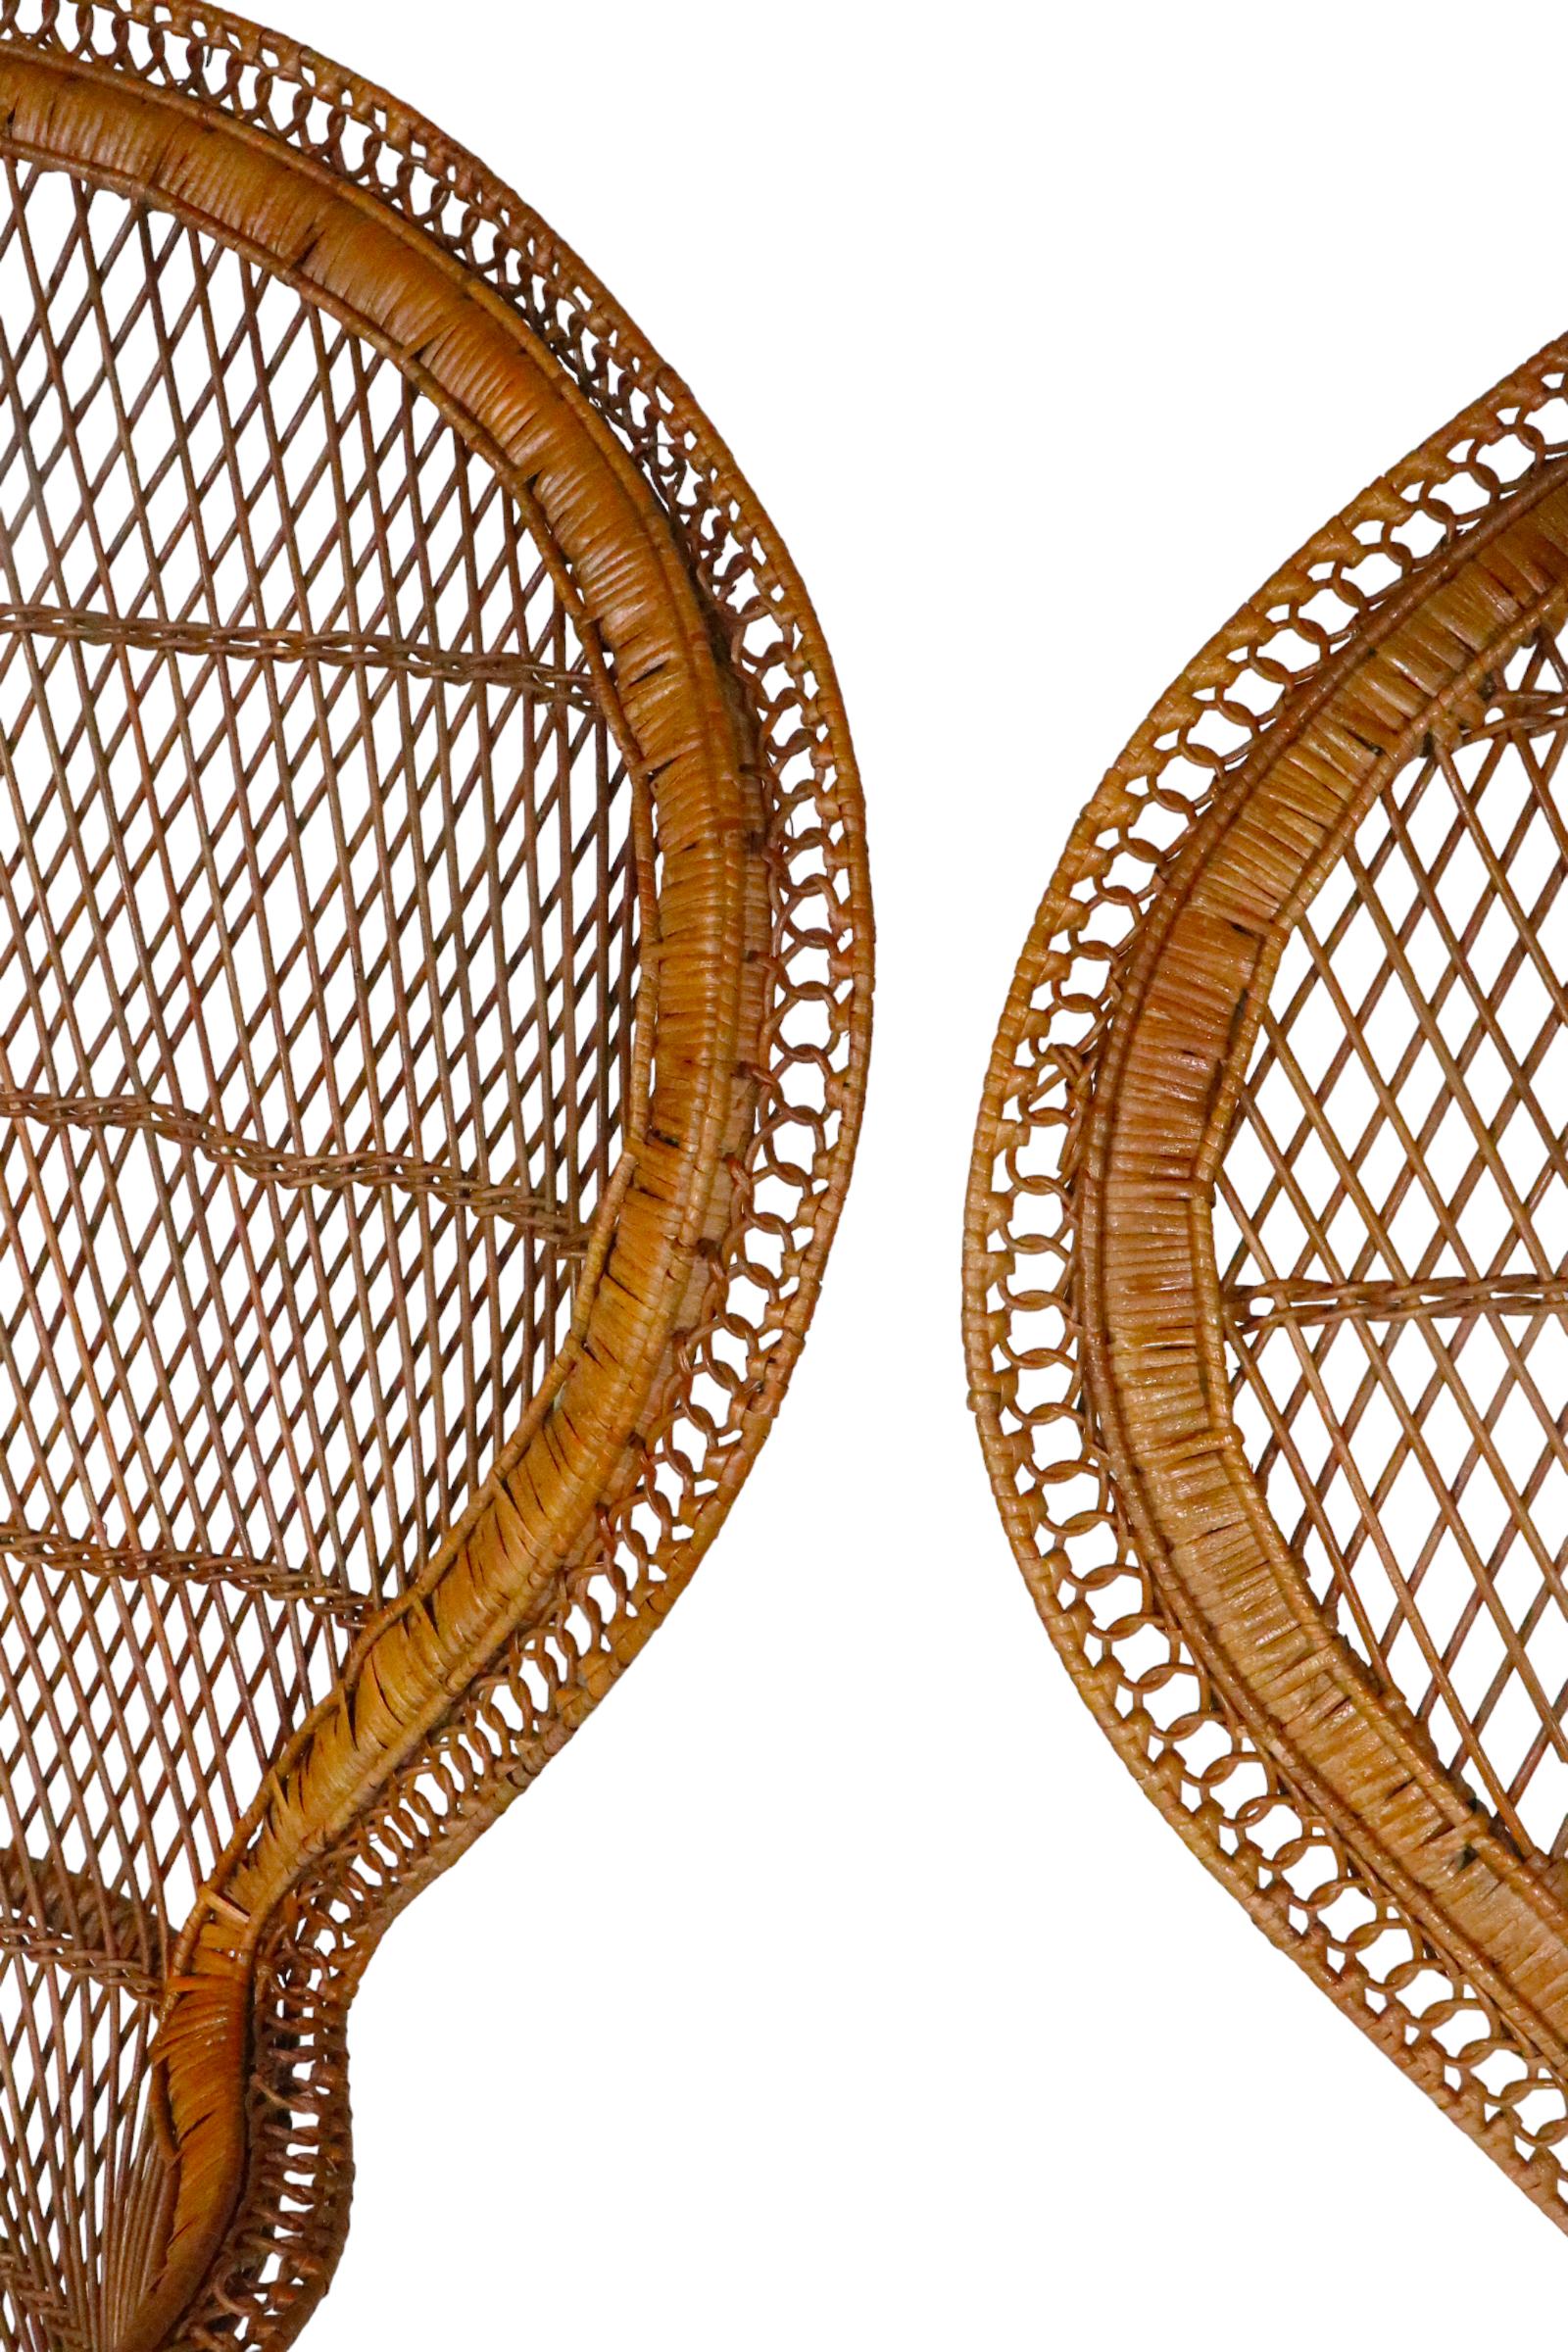 French Pr. Vintage Emanuelle Peacock Woven Wicker  Chairs c. 1970's For Sale